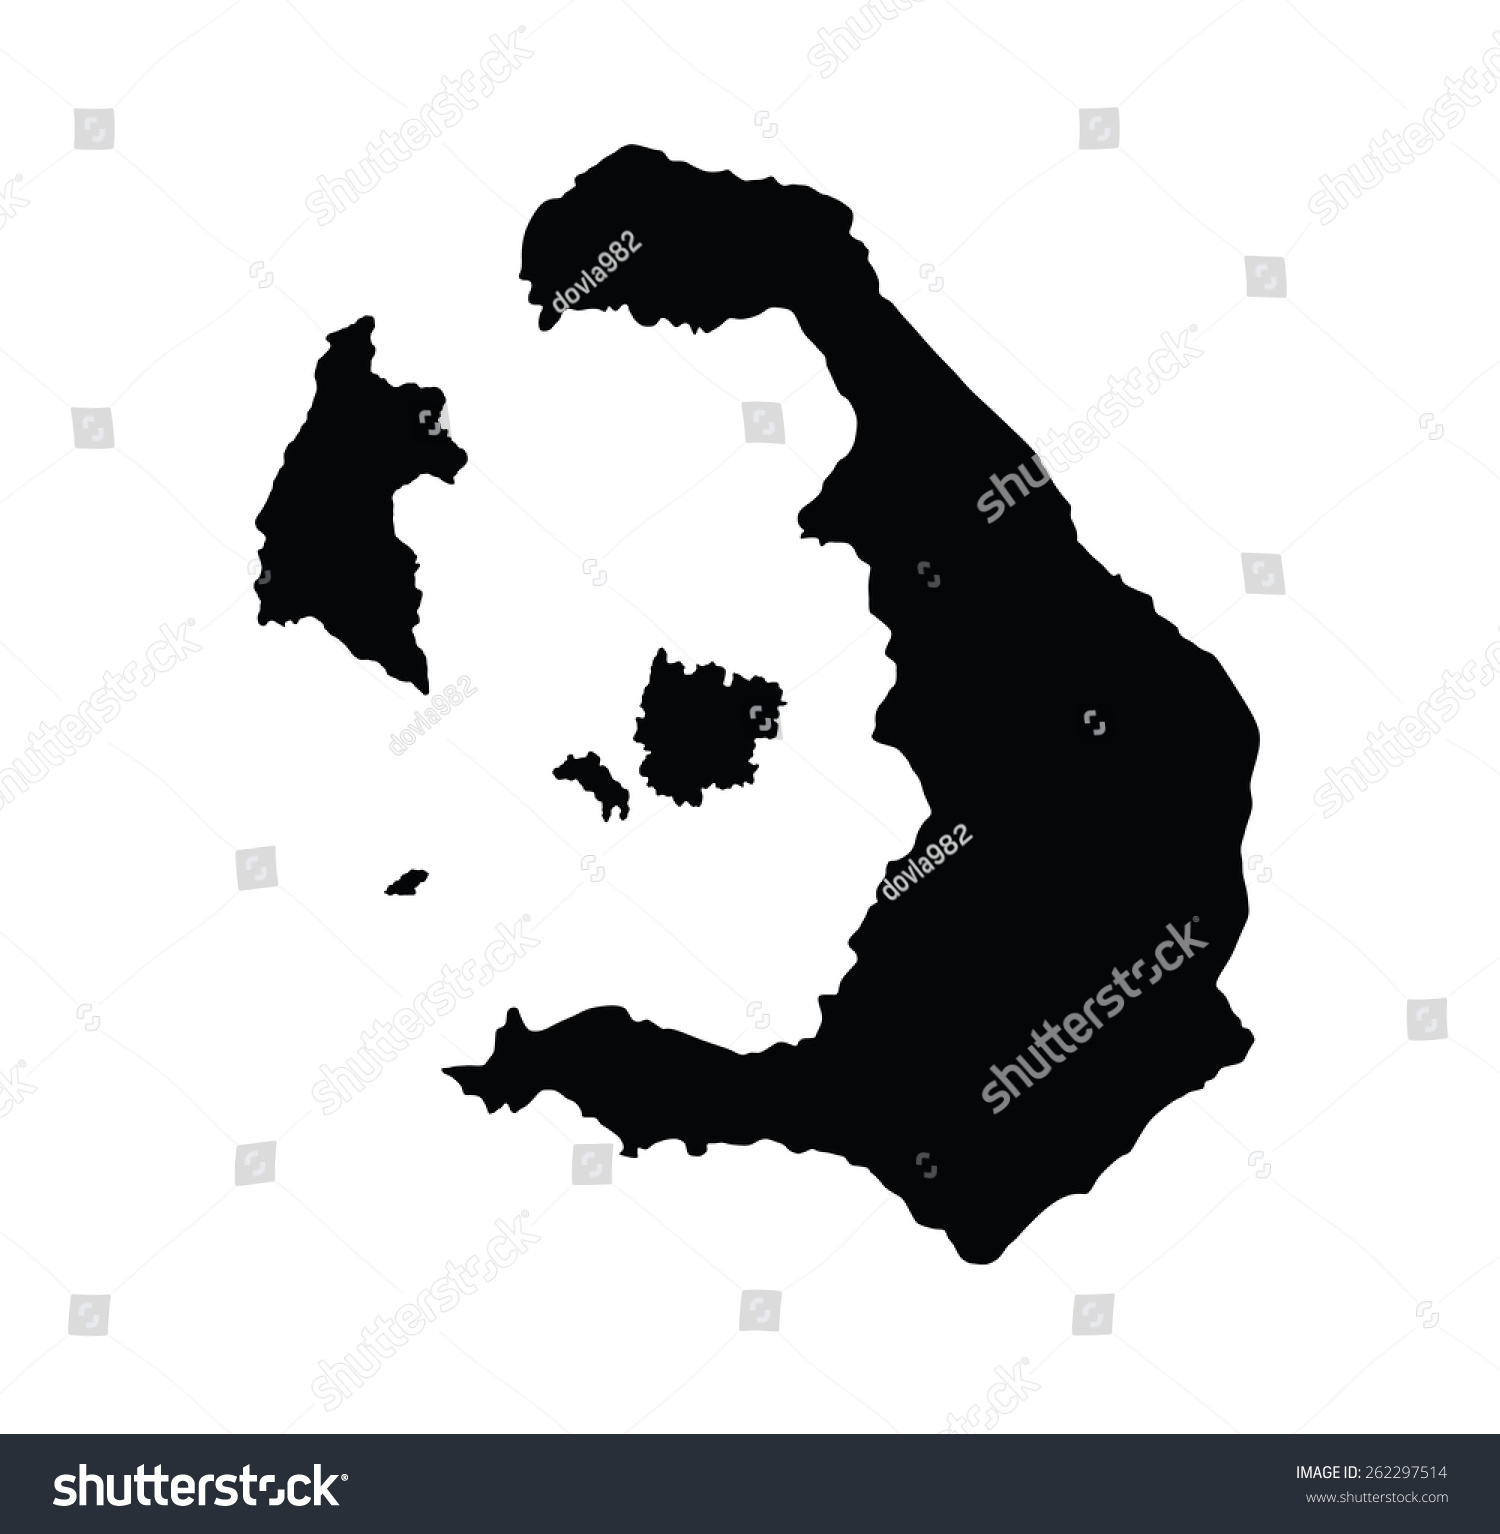 SVG of Island of Santorini in Greece map,vector map isolated on white background. High detailed silhouette illustration.  svg